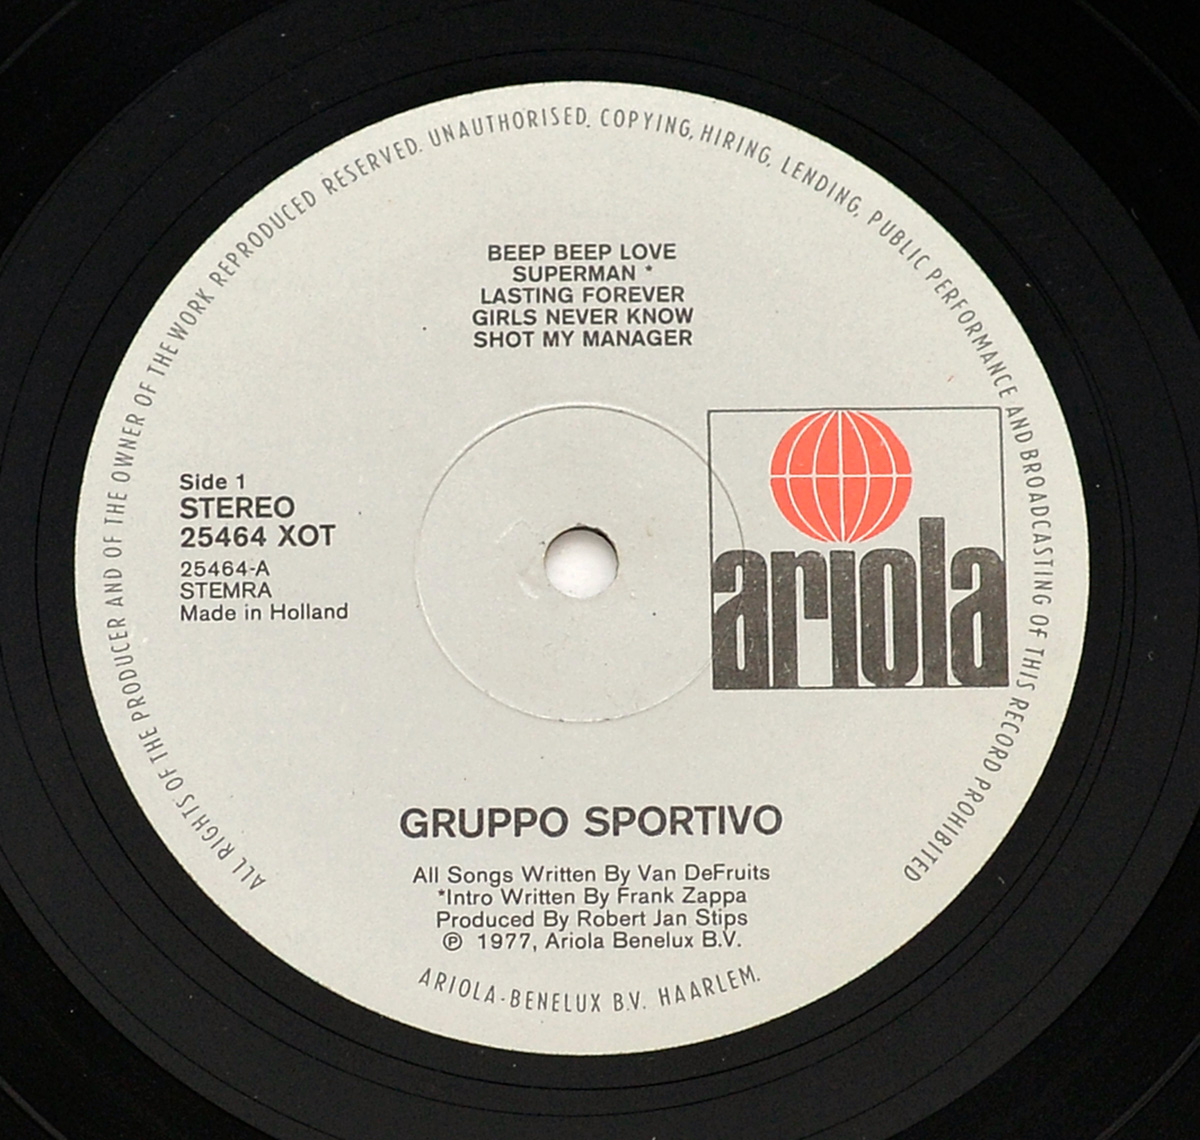 Photo of 12" LP Record Side One GRUPPO SPORTIVO 10 Mistakes  Vinyl Record Gallery https://vinyl-records.nl//